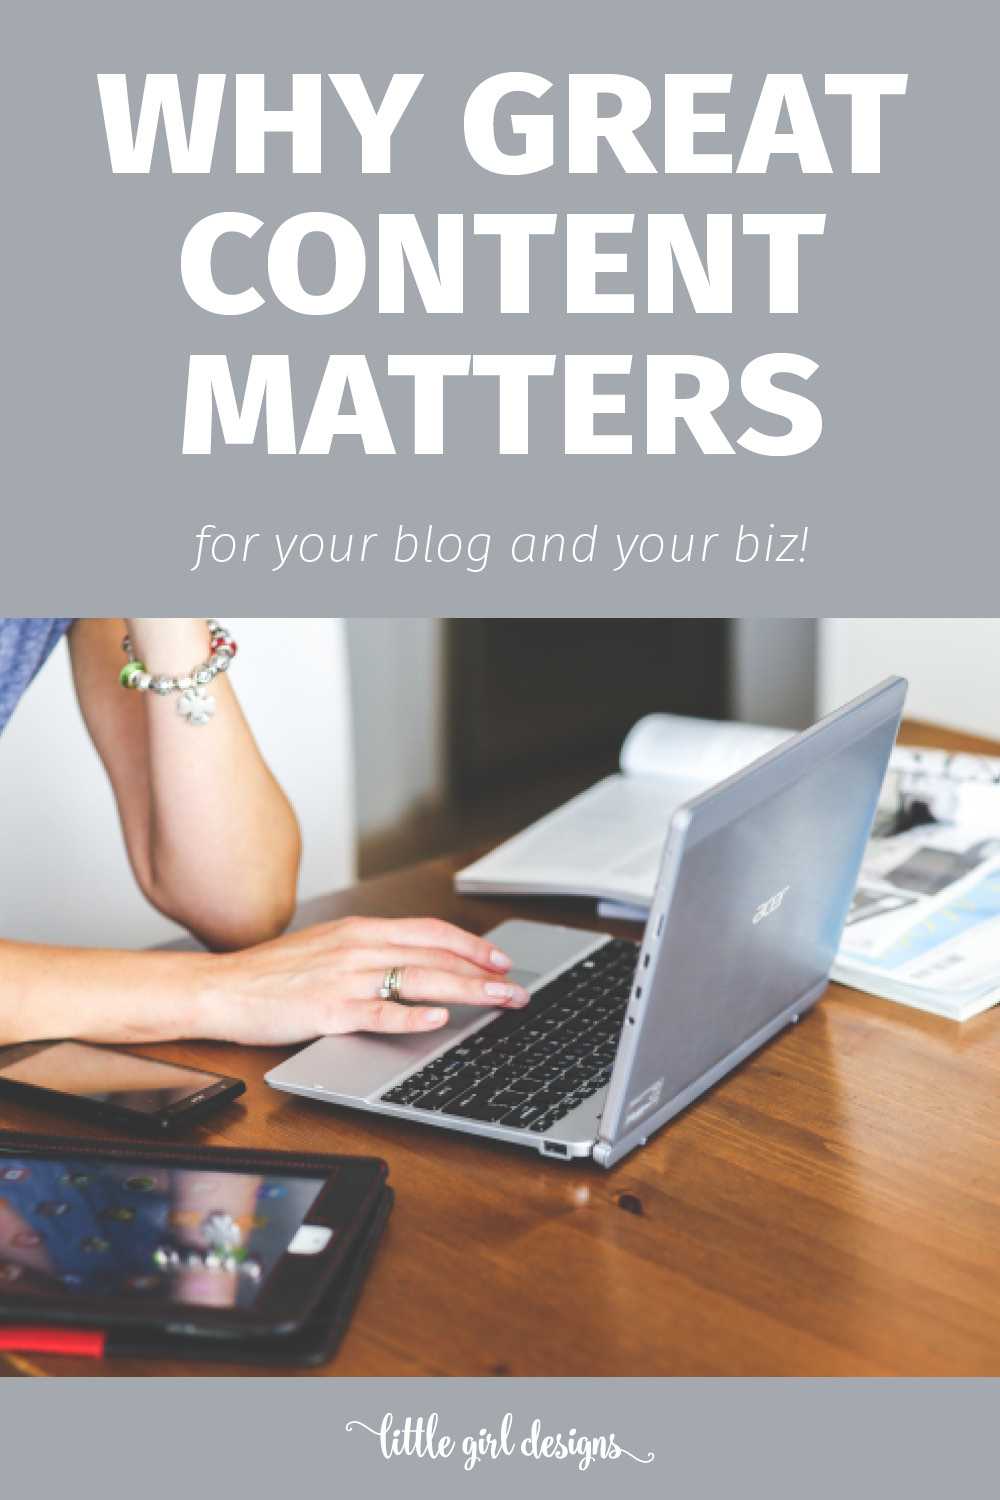 Why Great Content Matters for Your Blog and Biz